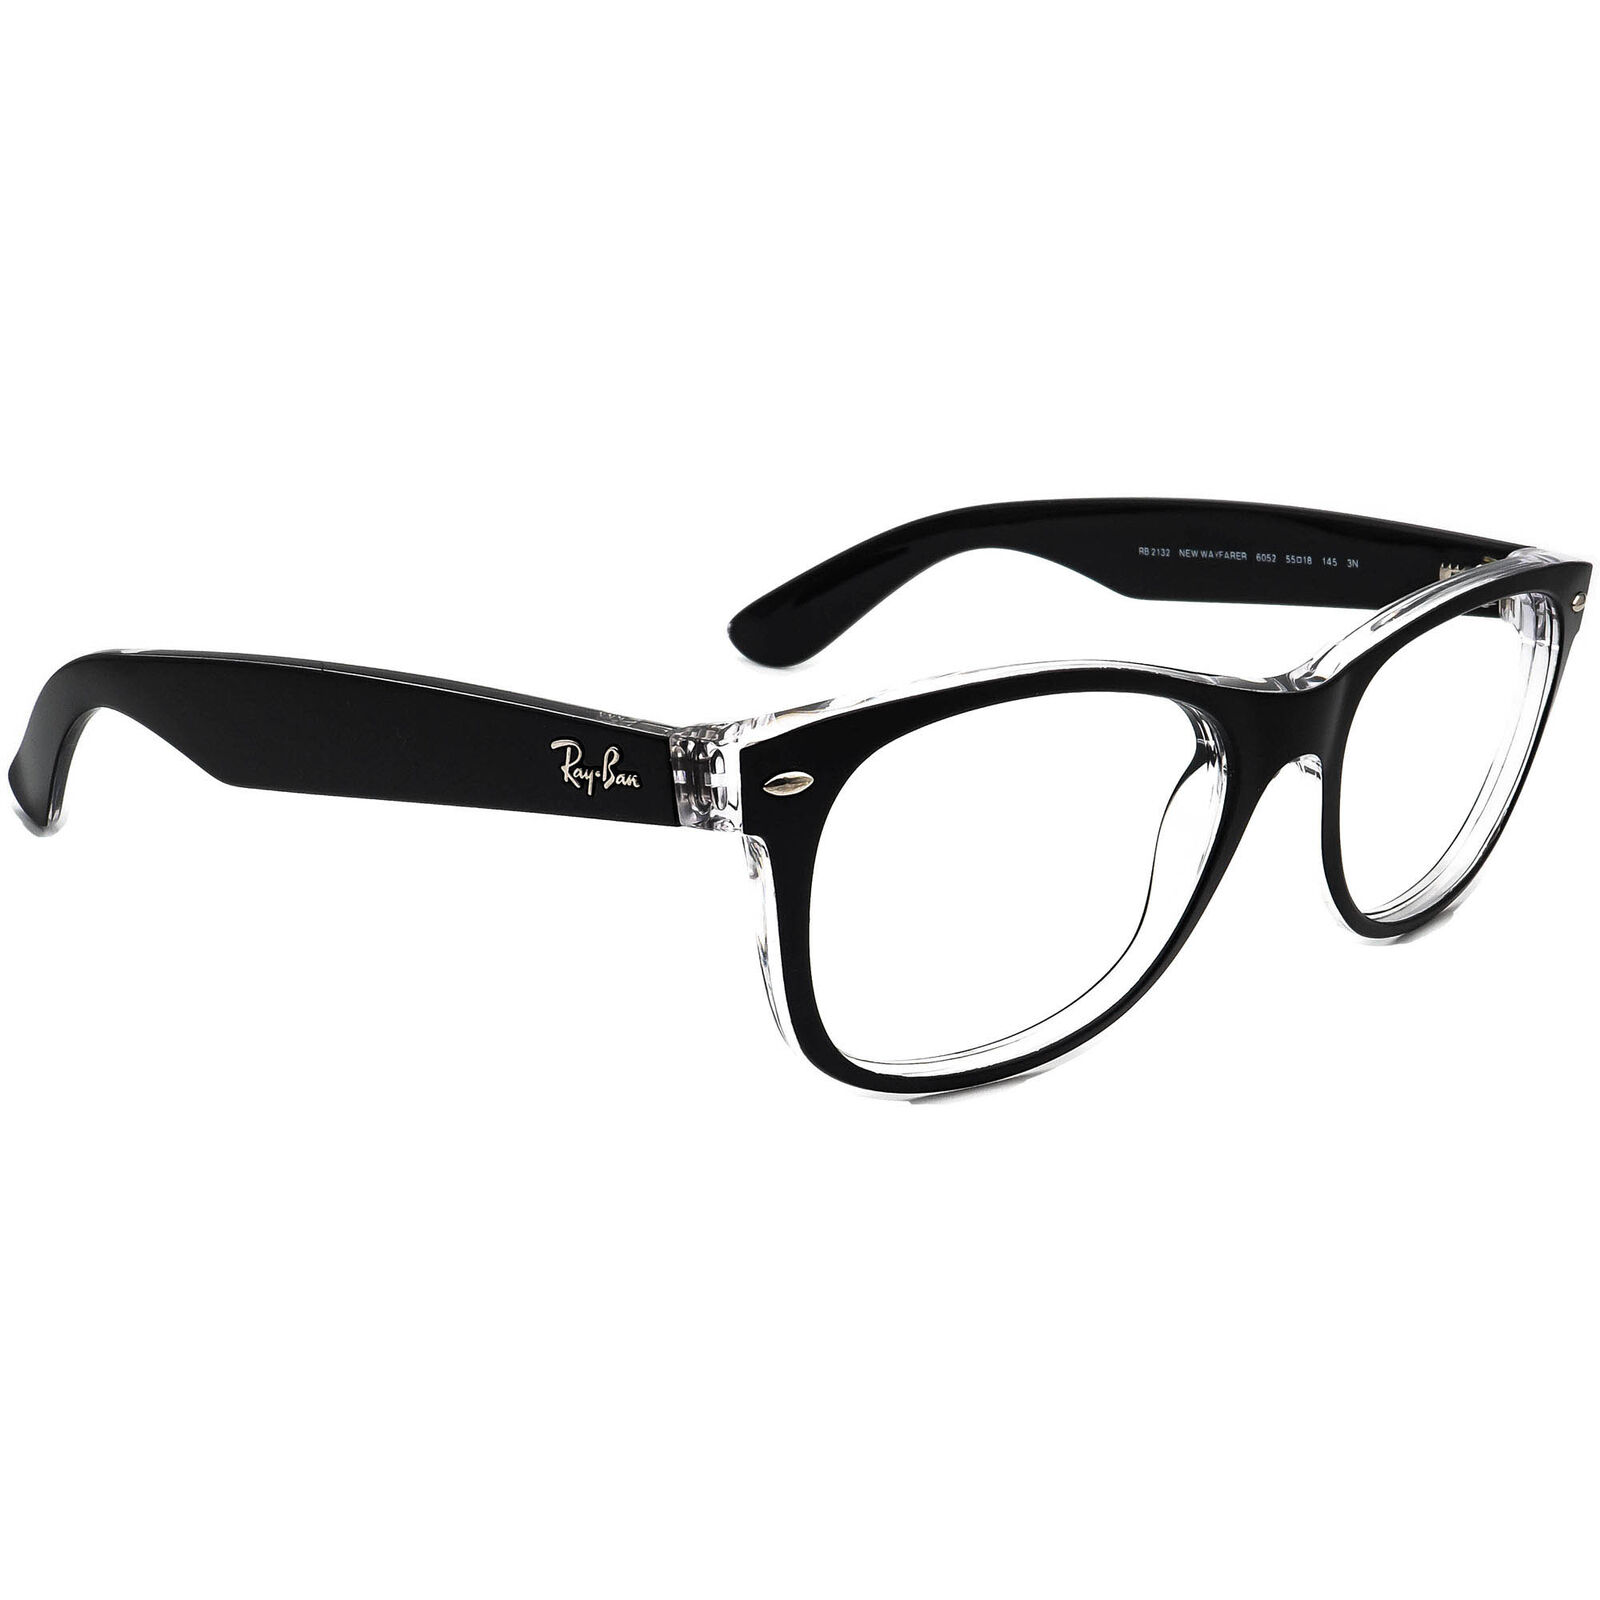 Ray-Ban Only RB 2132 New Wayfarer 6052 Black/Clear Italy 55 mm eBay